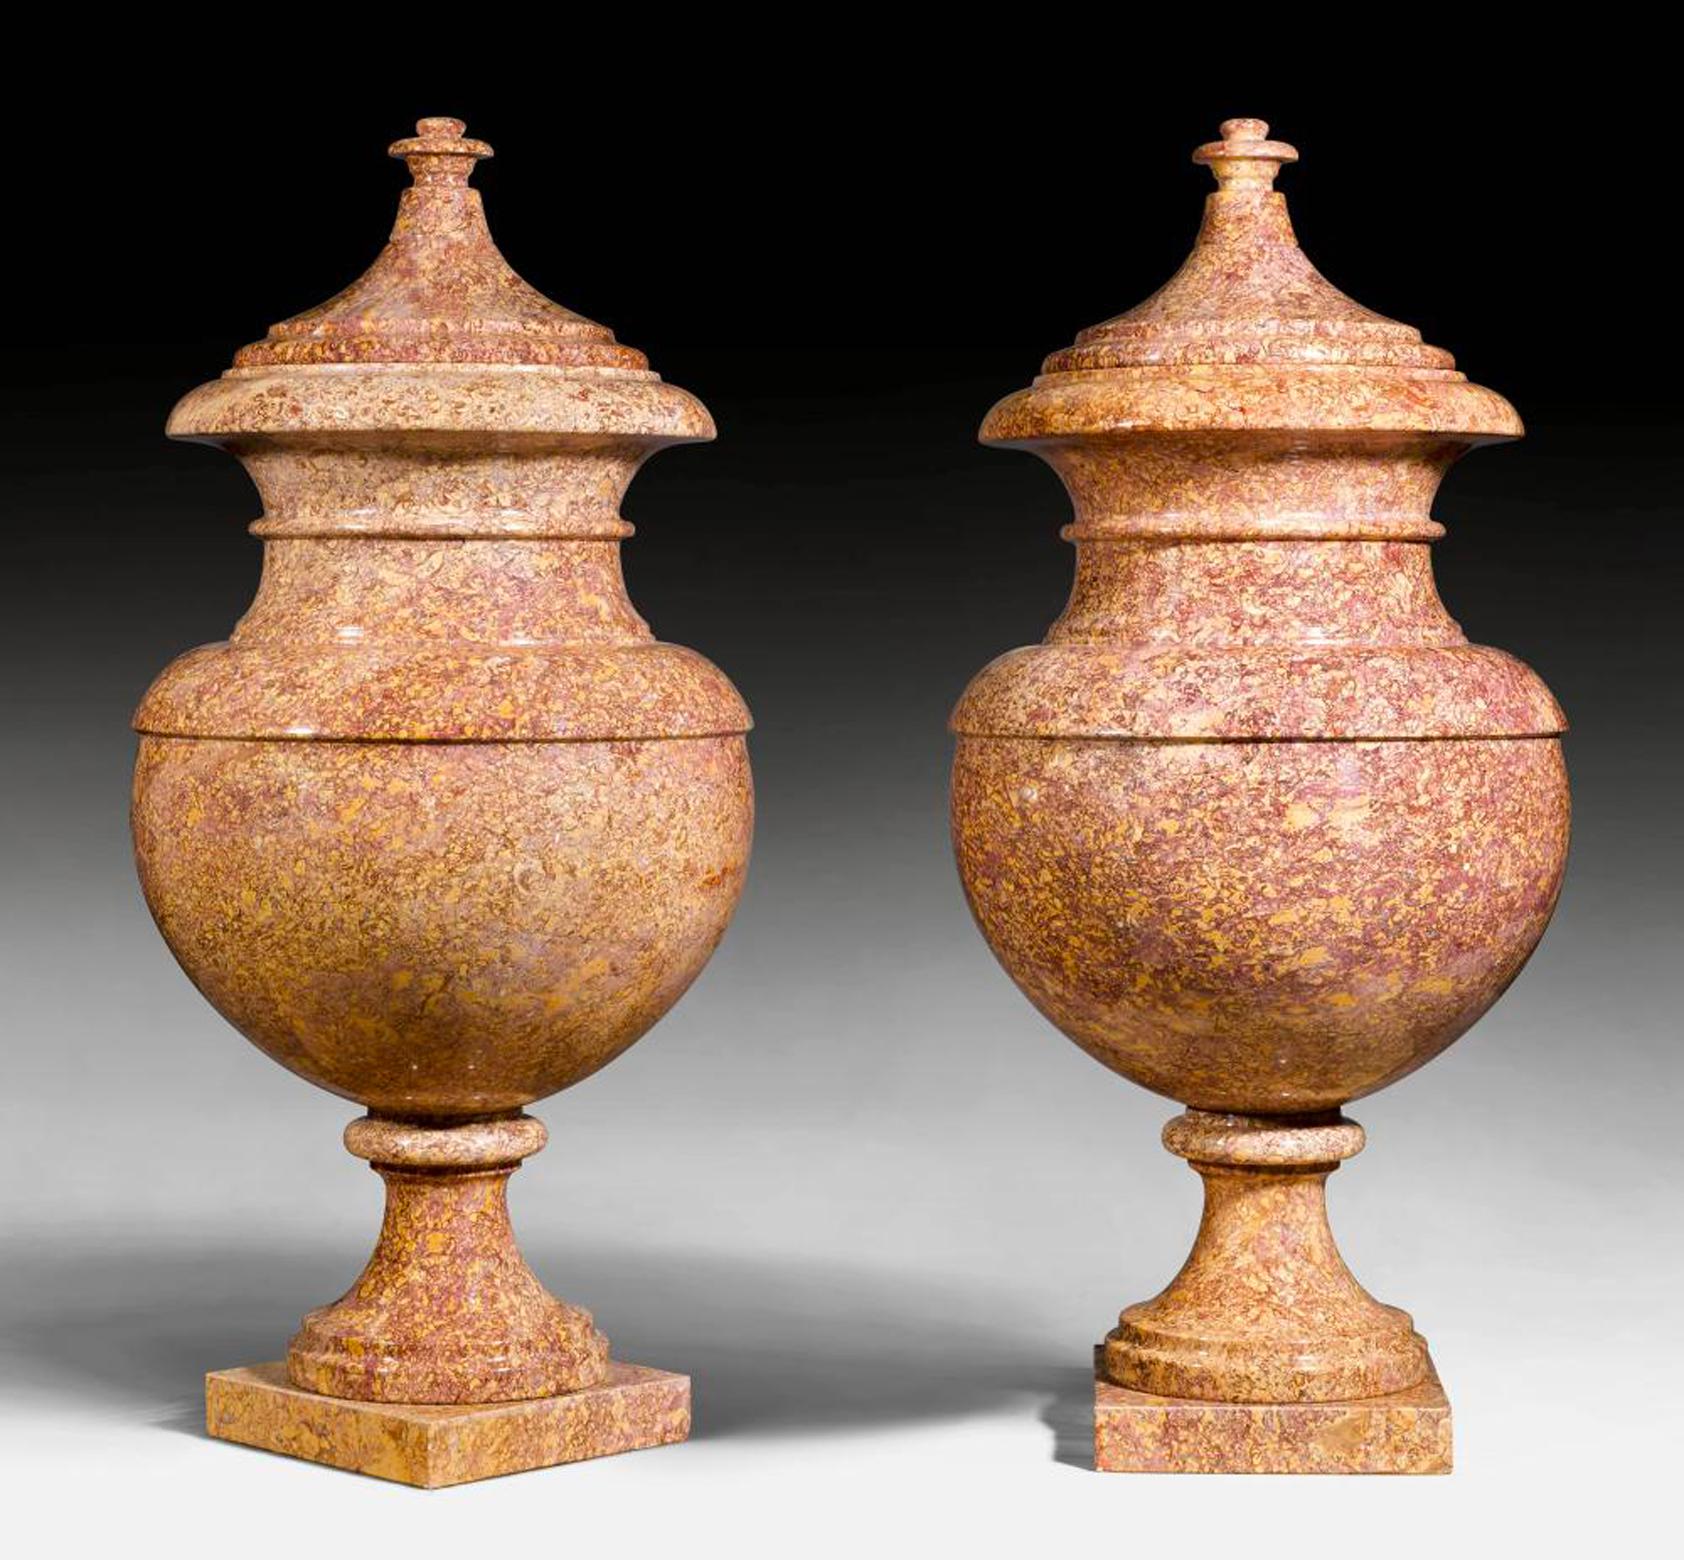 A very impressive and huge pair of Italian neoclassical pair of marble vases made in a very rare and elegant specimen and ancient marble called broccatello di Spagna. The shape and the proportion of the vases are made in according with the guideline